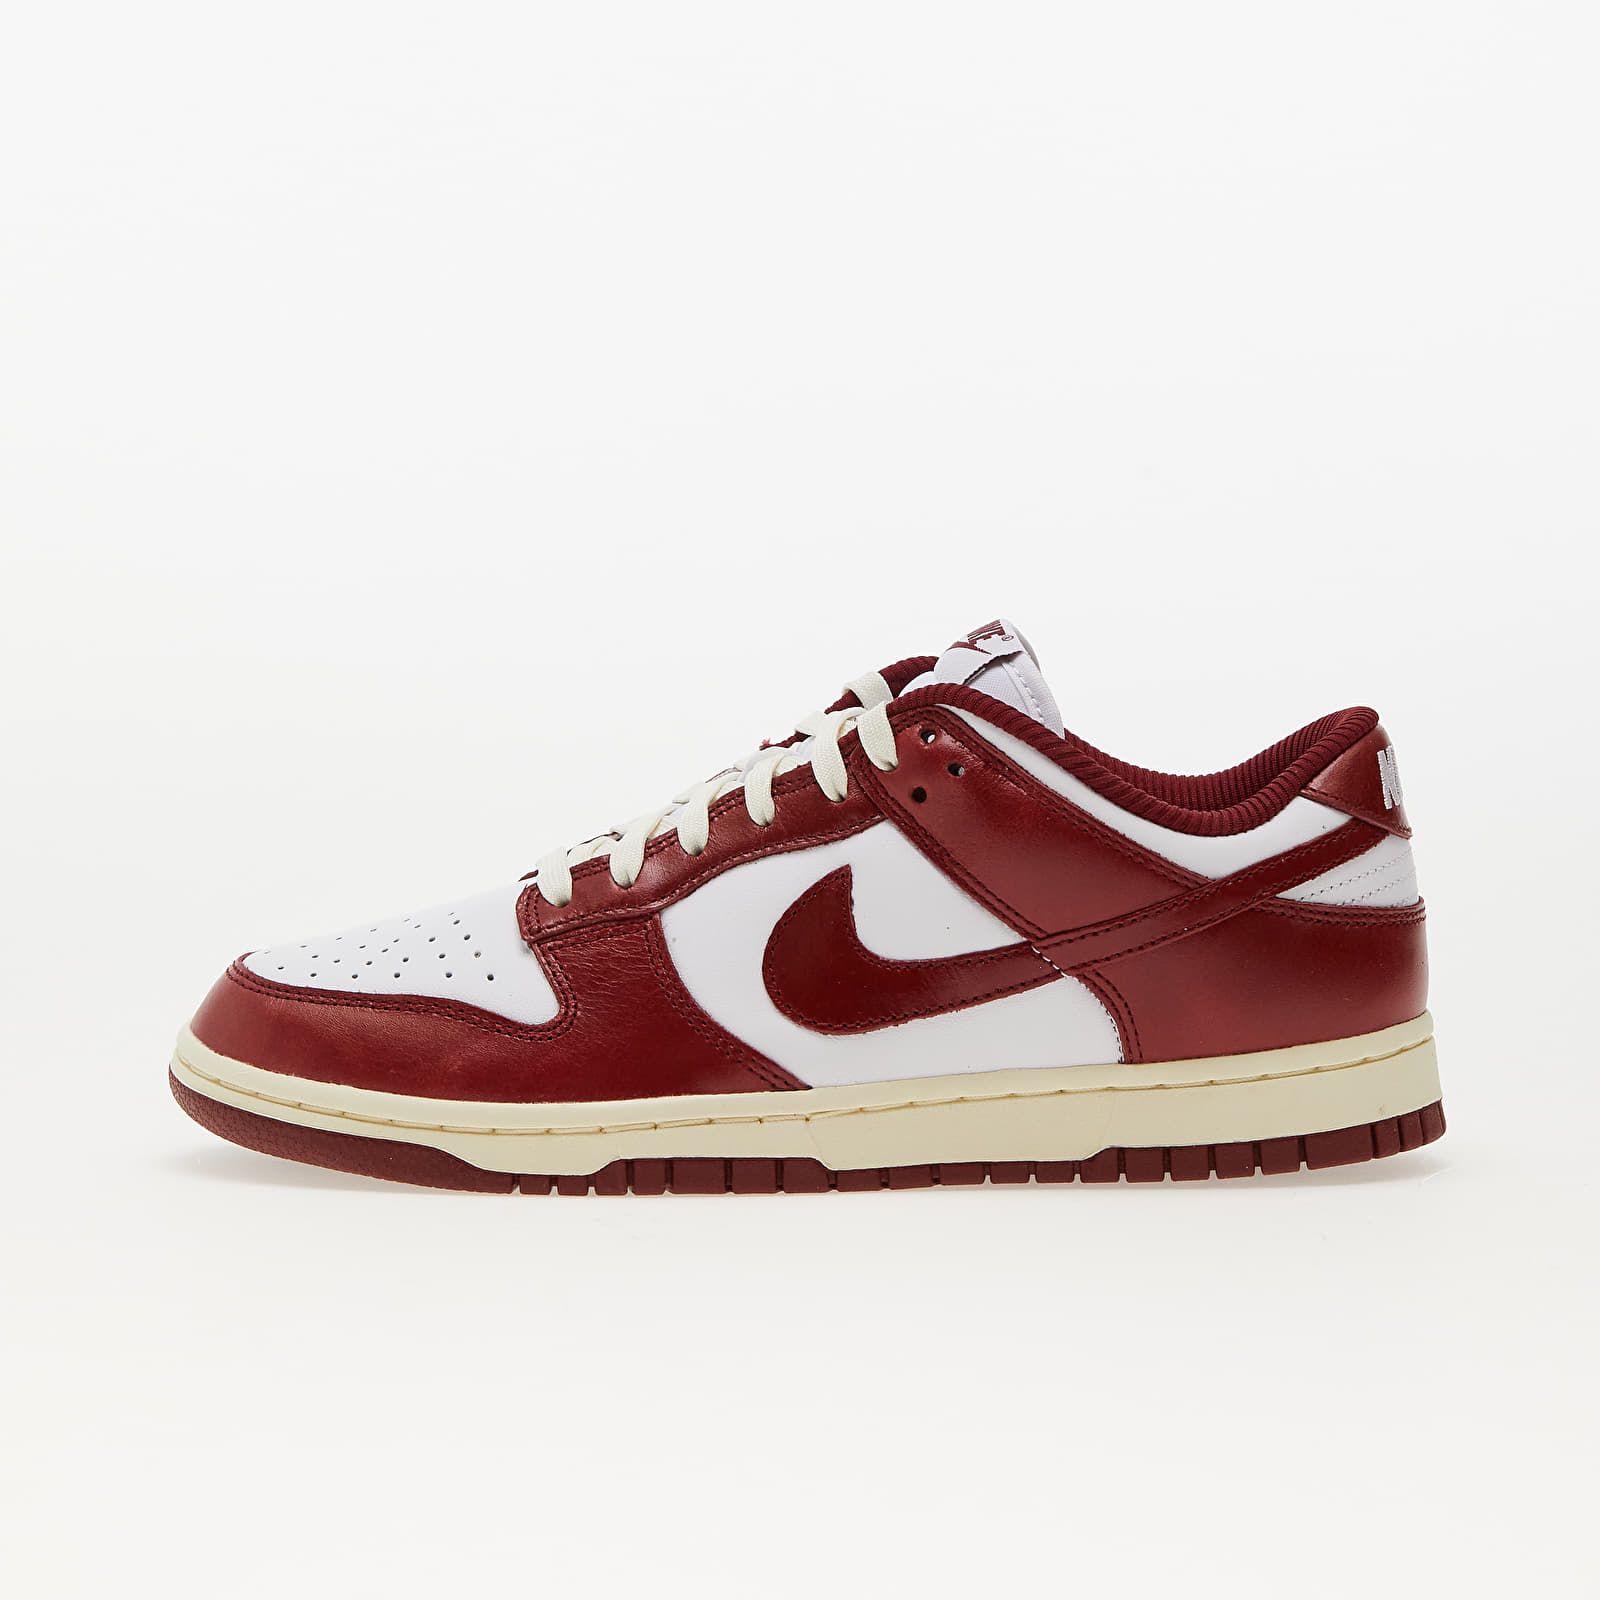 Women's shoes Nike W Dunk Low Premium White/ Team Red-Coconut Milk